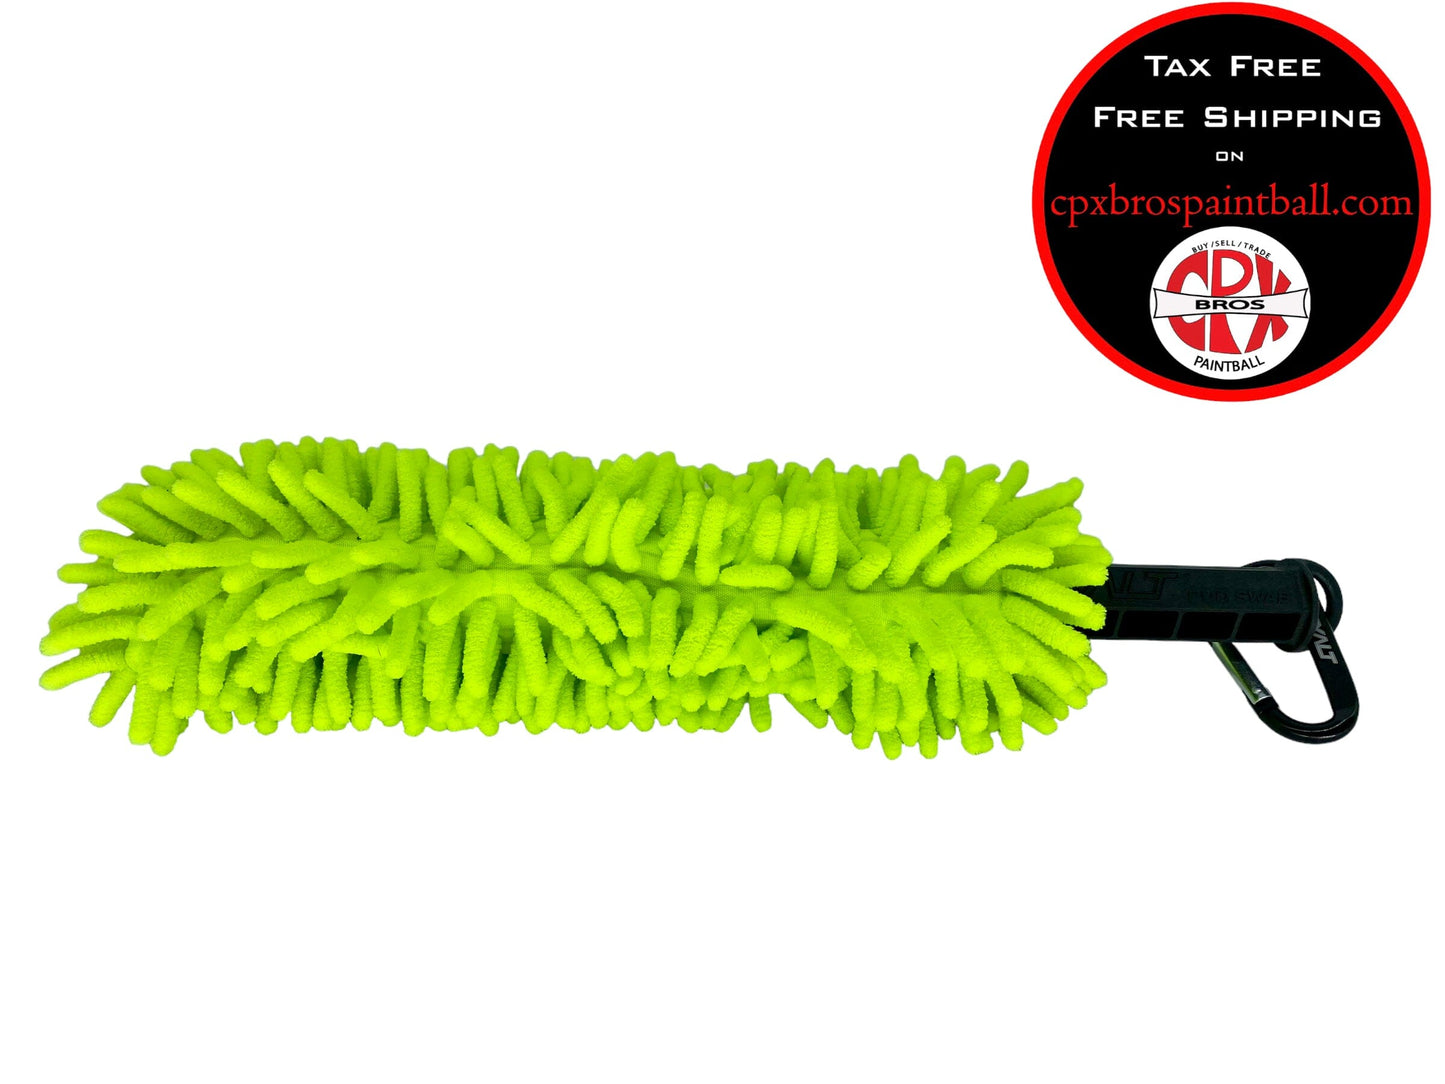 Used Paintball Washable Pod Swab/Squeegee Cleaner CPXBrosPaintball 